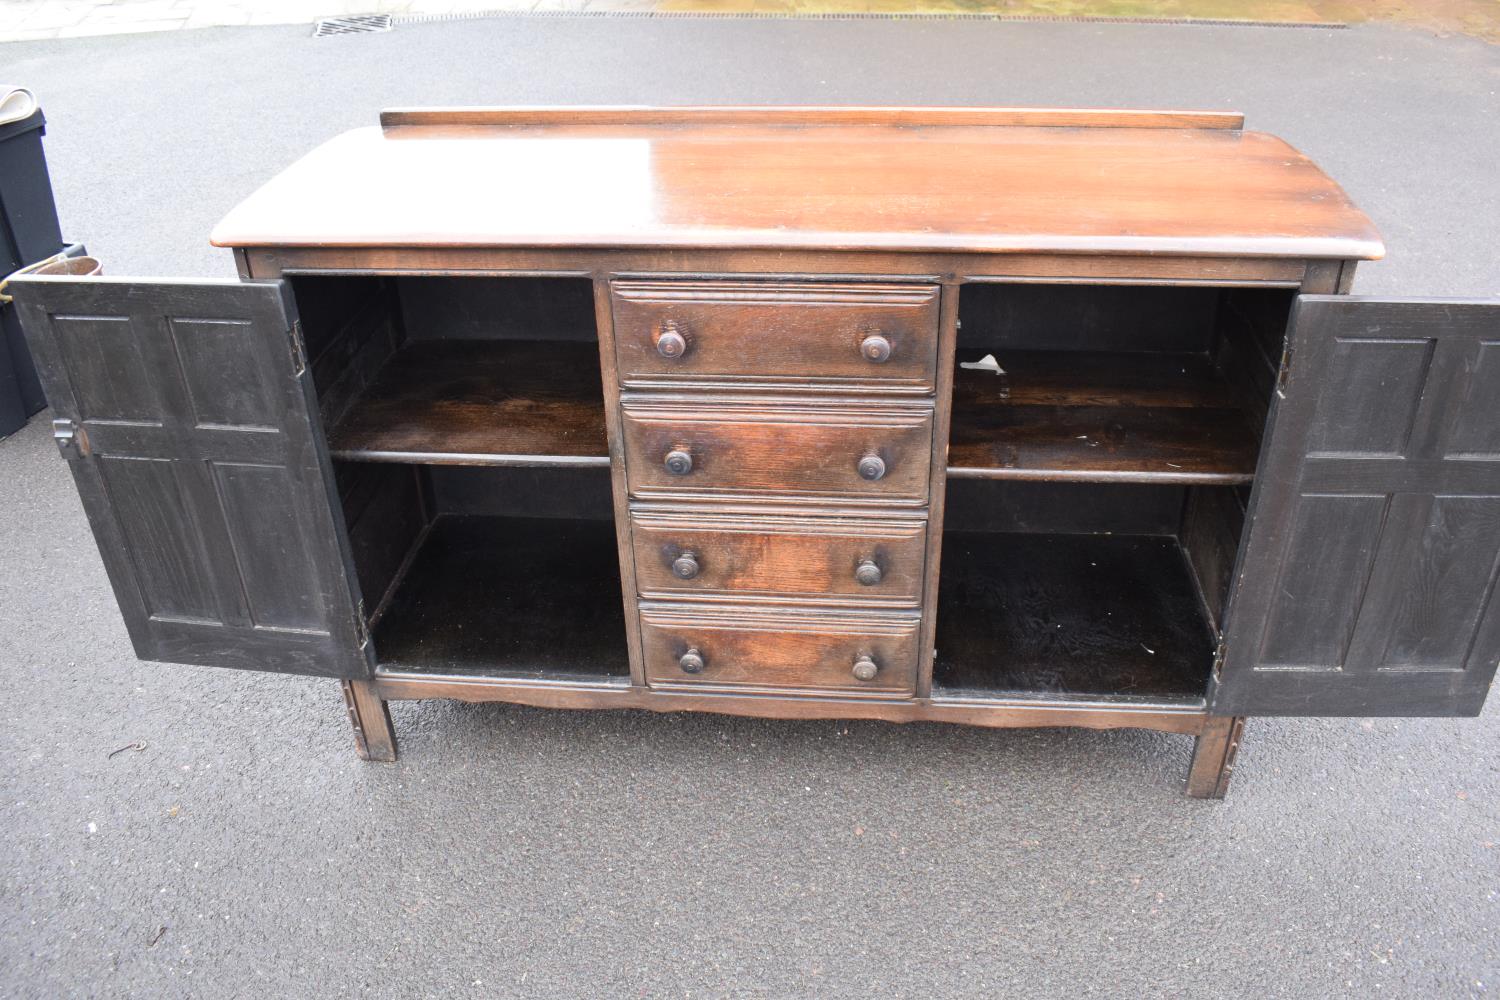 Ercol dark elm sideboard with 2 doors and 4 drawers. In good functional condition with some areas of - Image 9 of 9